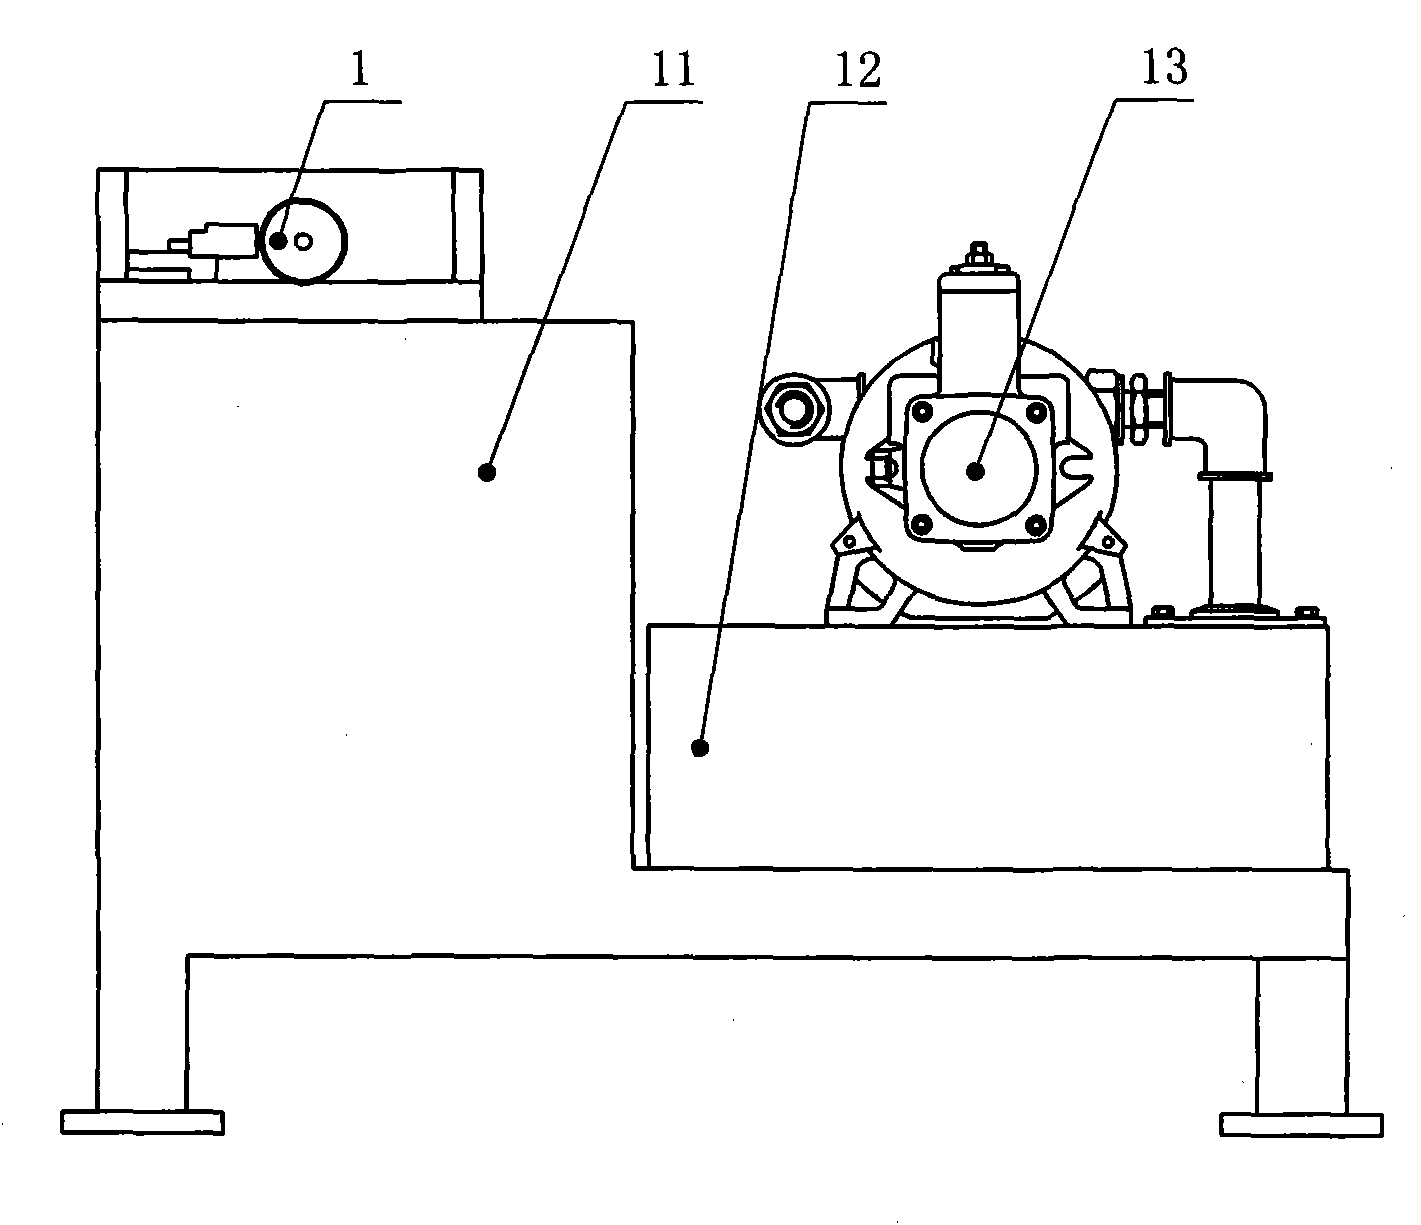 Inner diameter finishing machine tool of small-size connecting bend